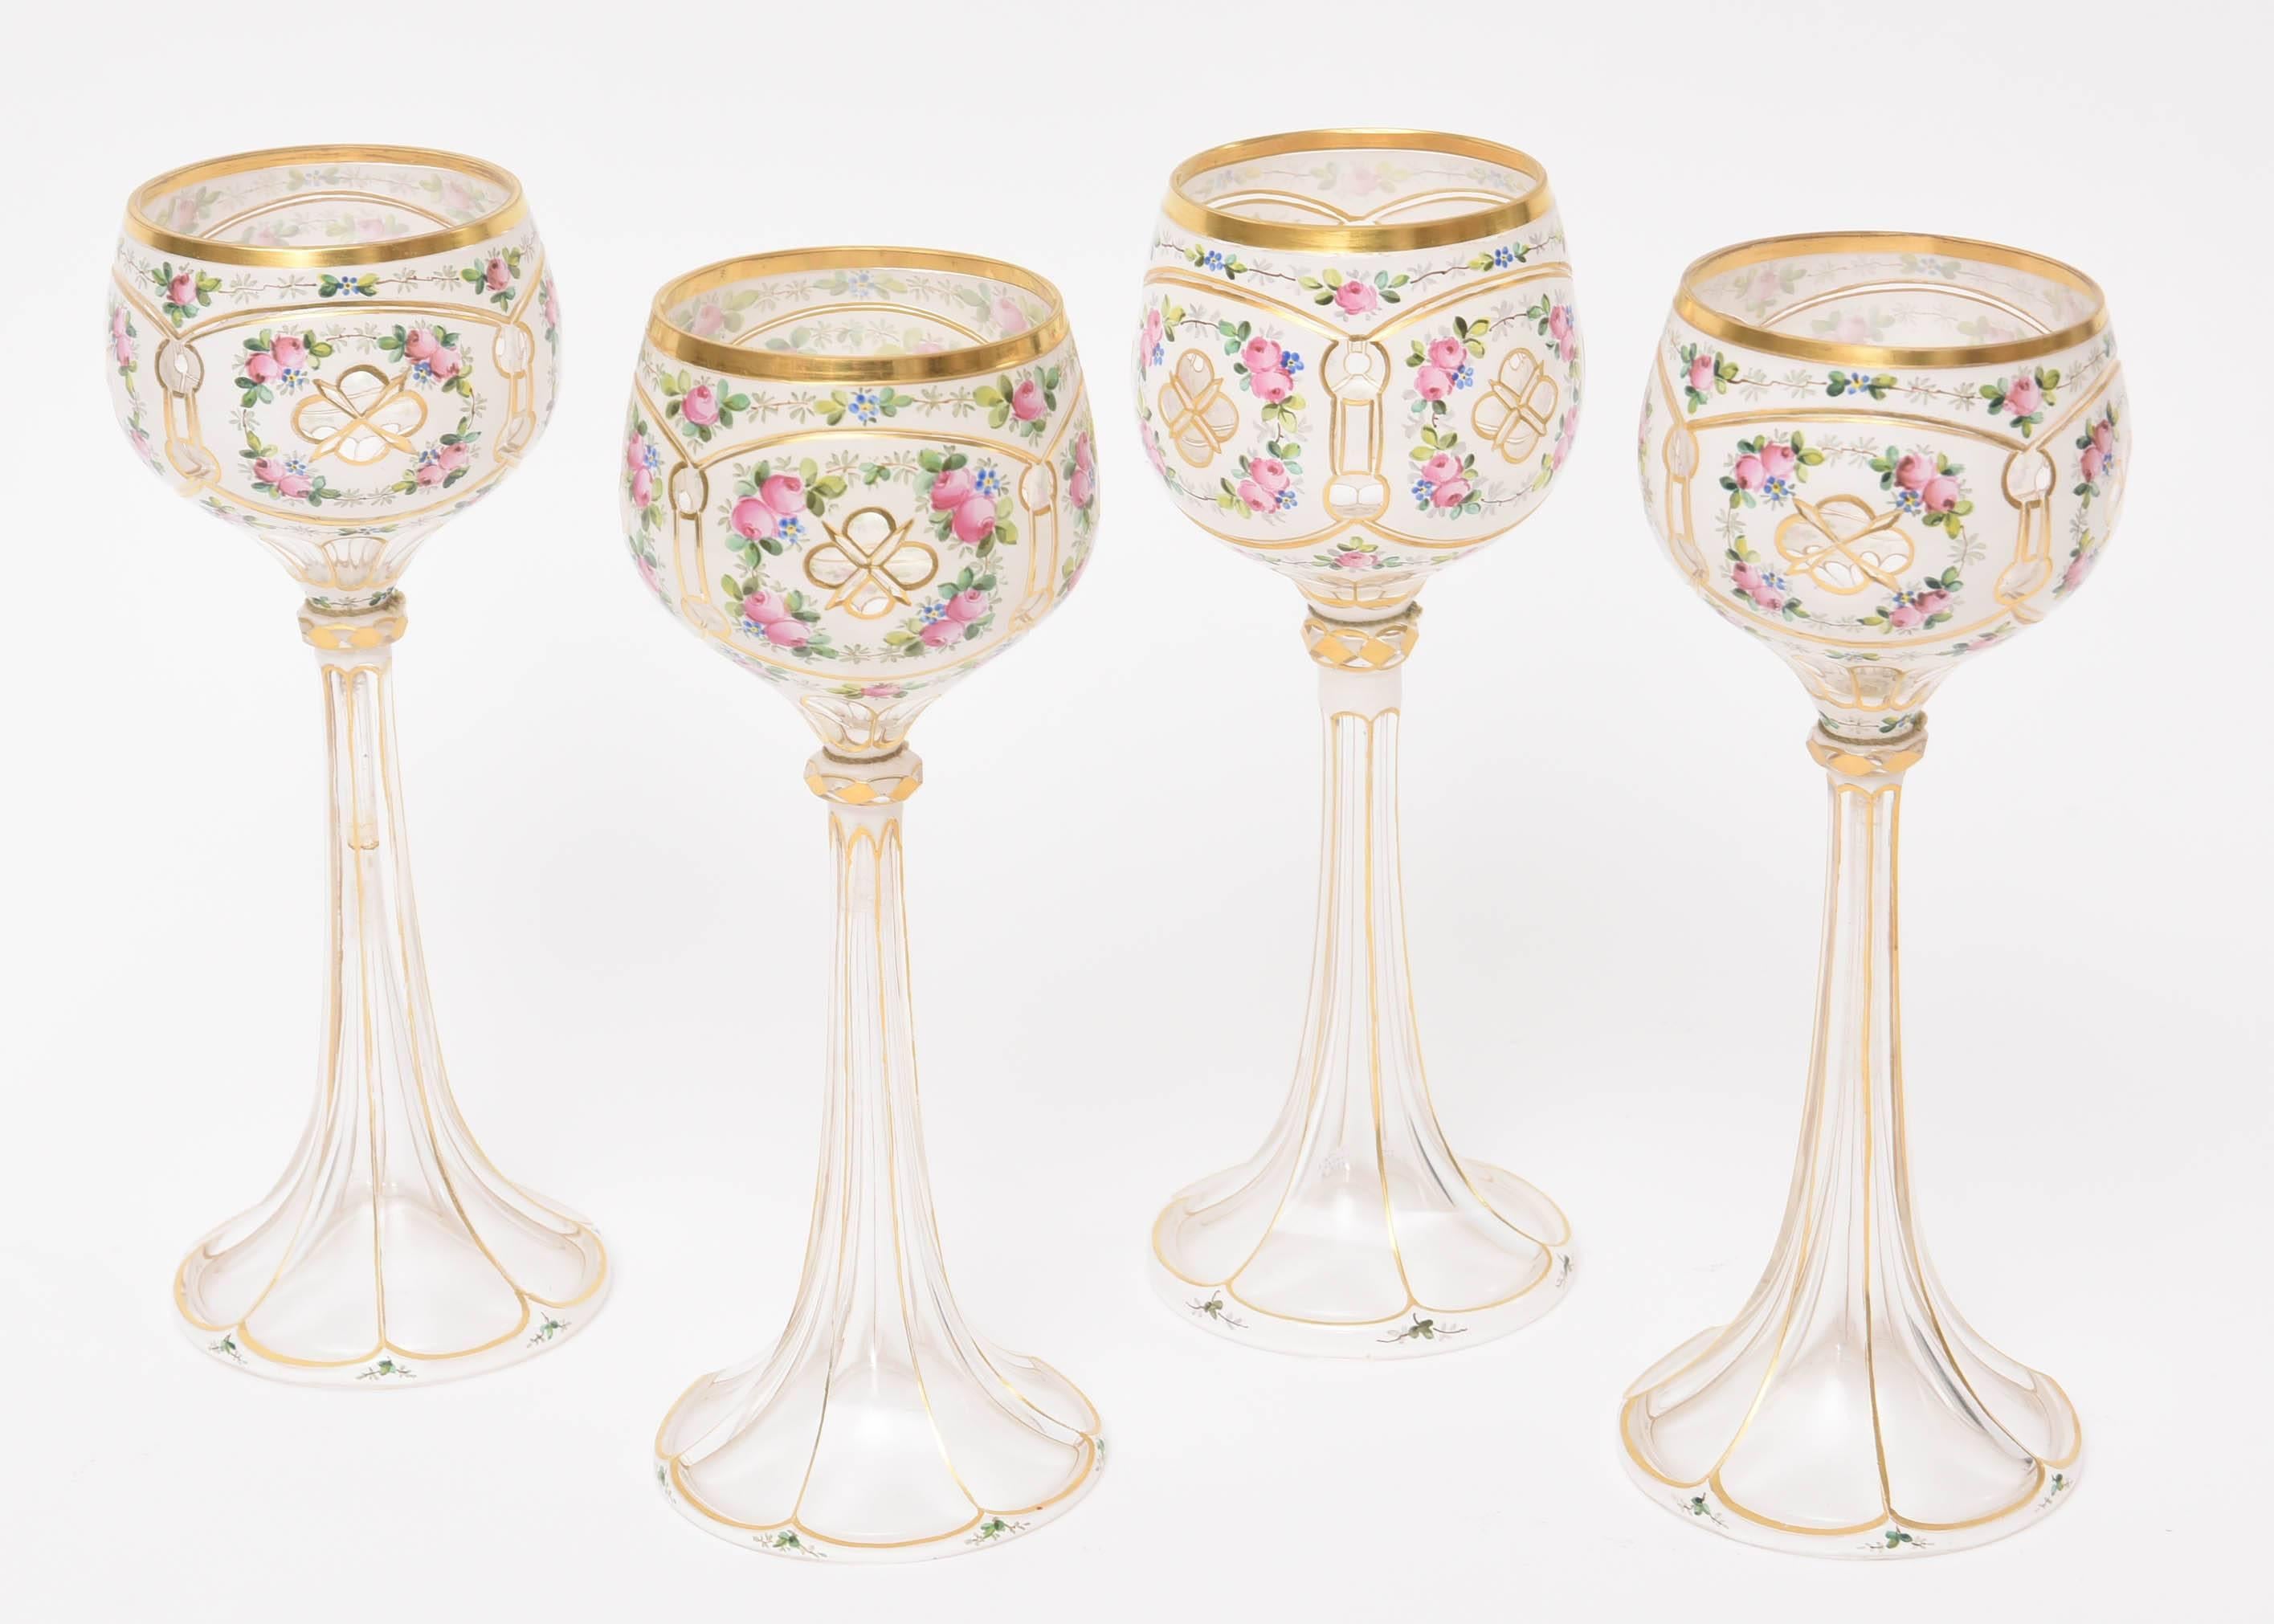 A set of four stunning wine goblets featuring a beautiful white cased glass over the clear with a blown scalloped trumpet shaped stem. Hand-painted florals and 24-karat are lavishly applied to each one. These are nicely proportioned and feature a